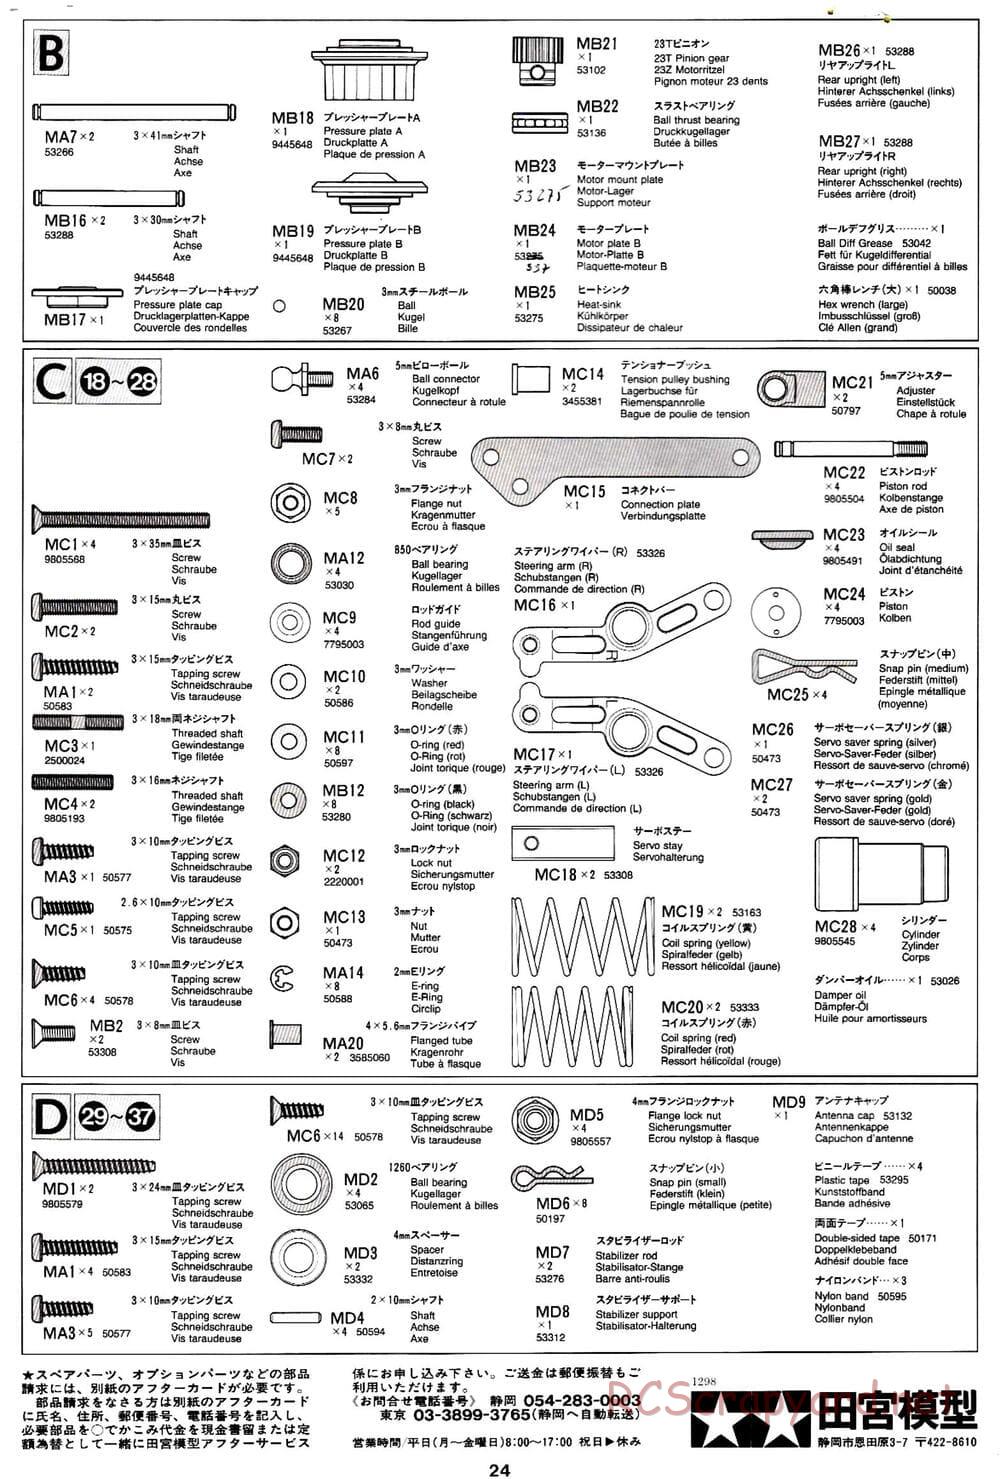 Tamiya - TA-03R TRF Special Edition Chassis - Manual - Page 24